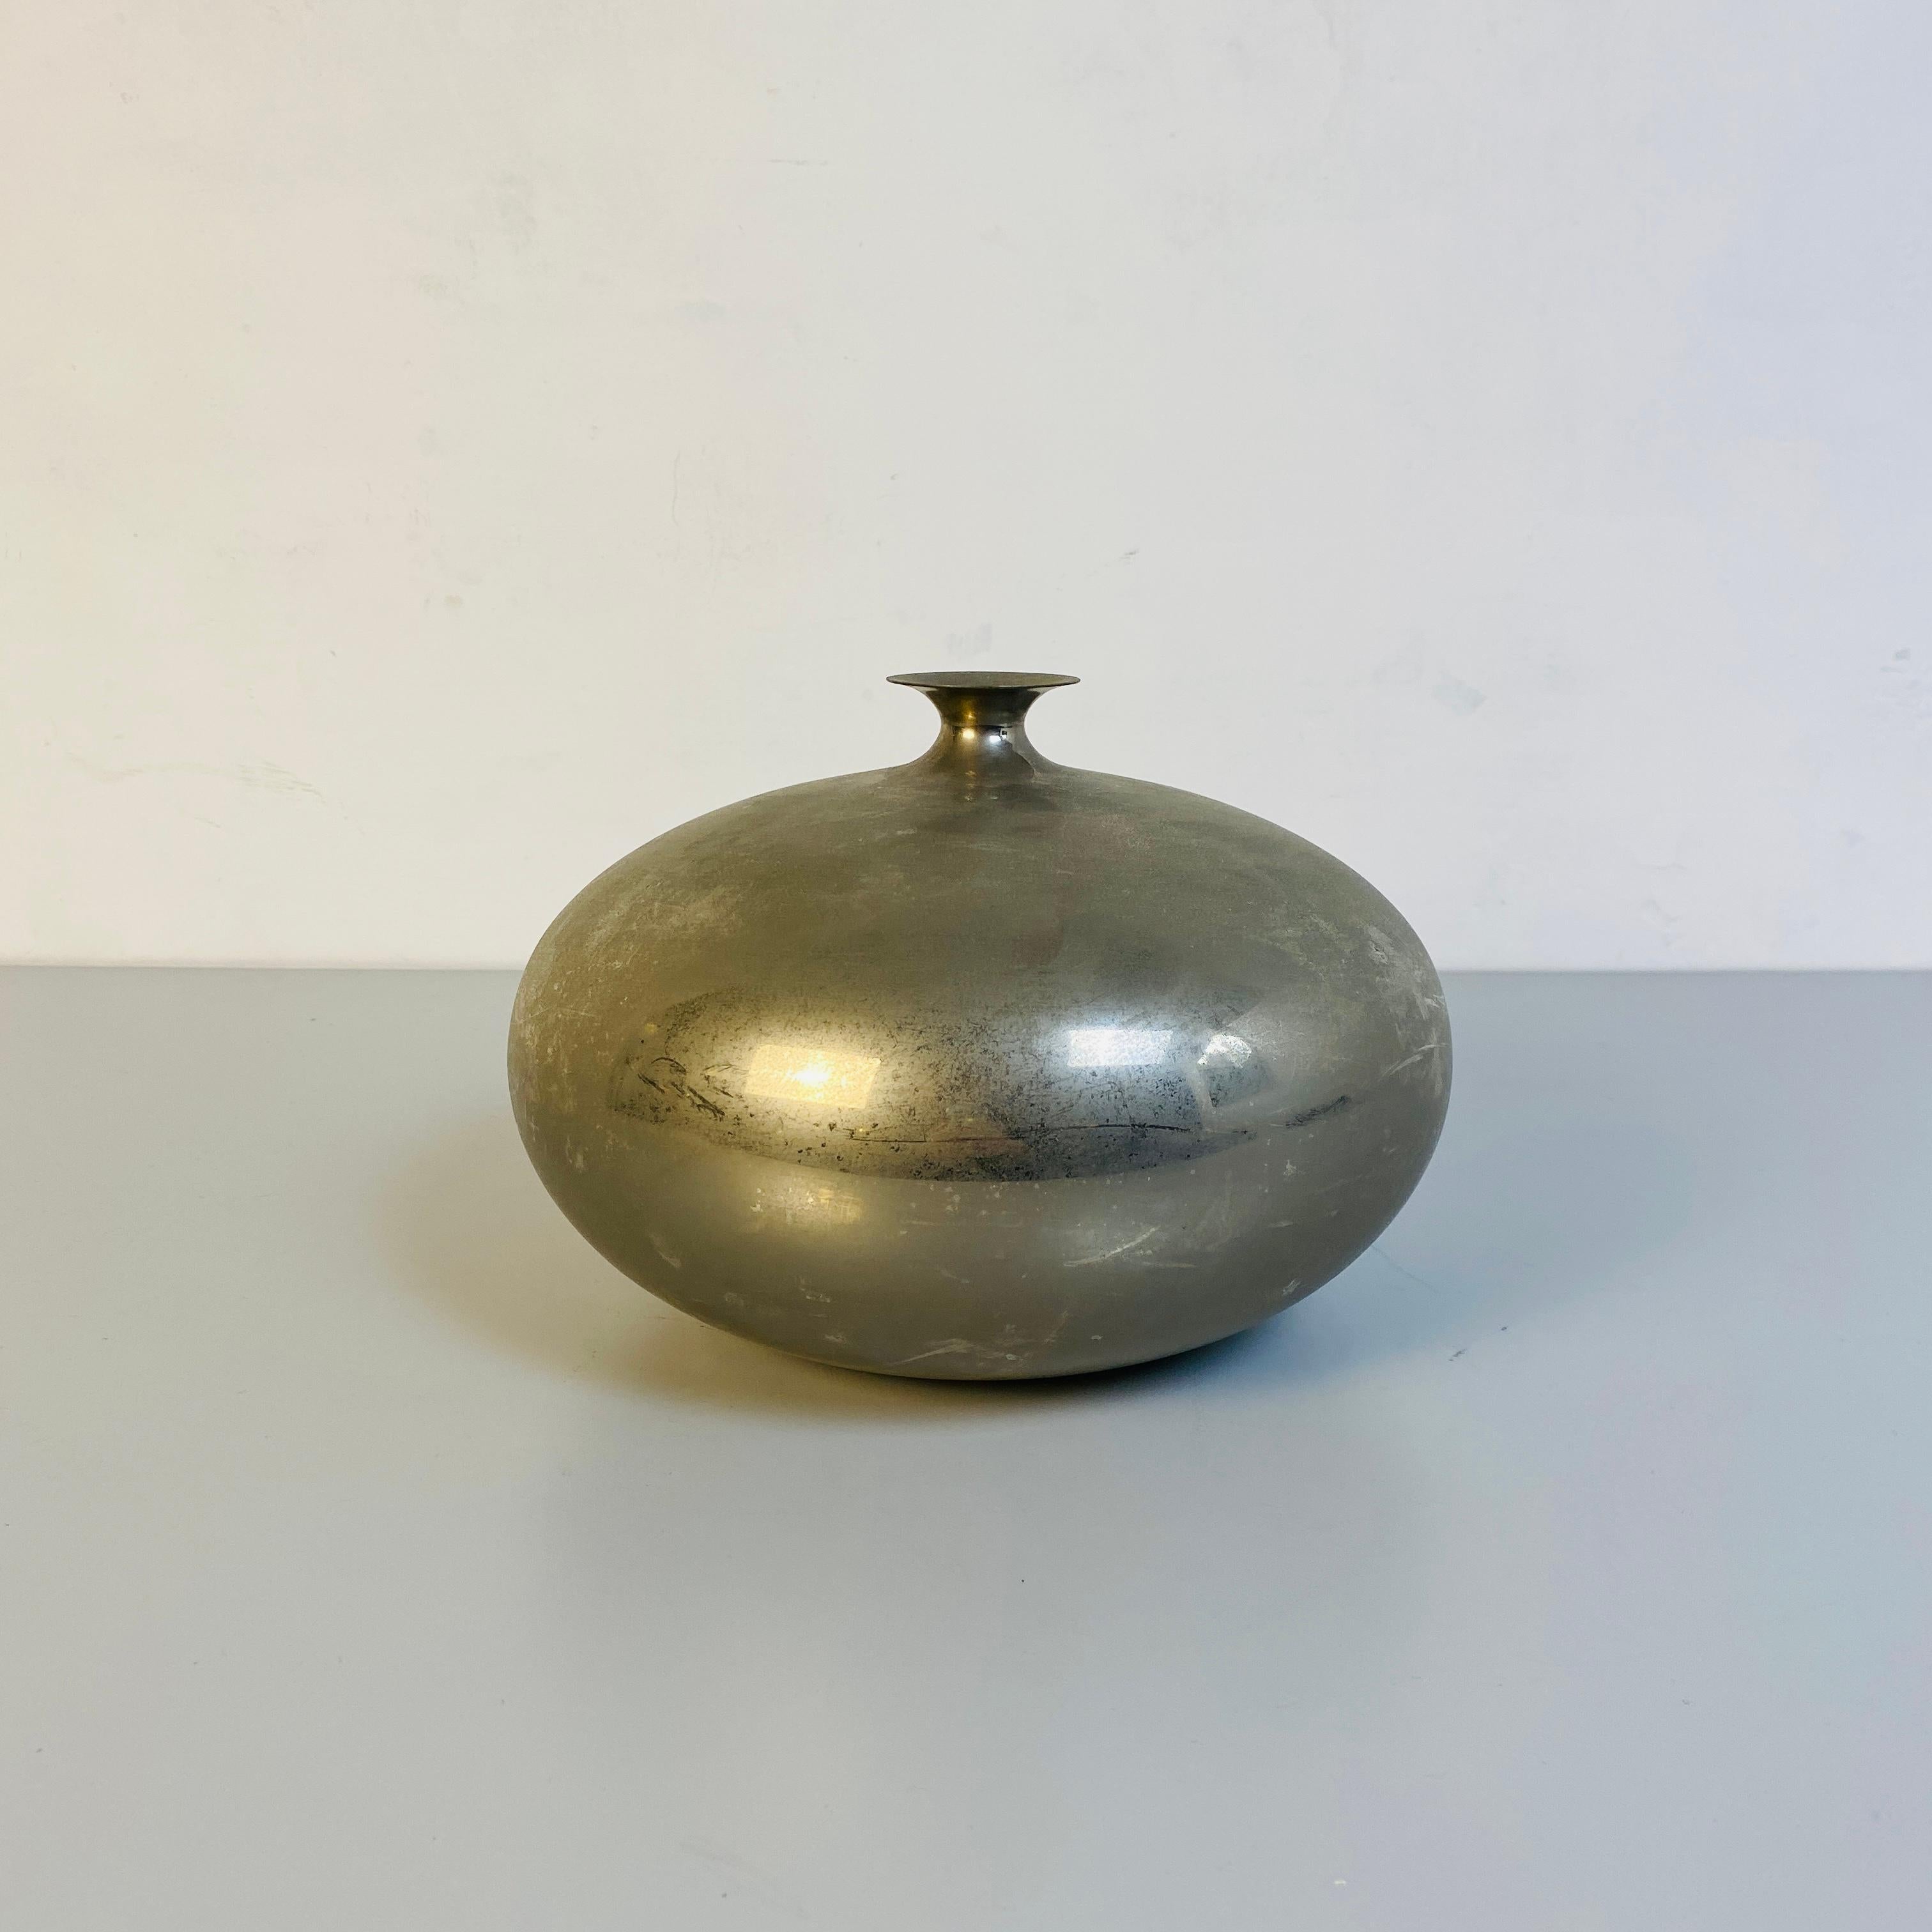 Italian Mid-Century Modern gray pewter rounded vase 1970s
Rounded pewter vase, slightly satin-finished surface.

Good condition, with dents on the metal visible in the photos.

Measures in cm 25 x 18 H.
   